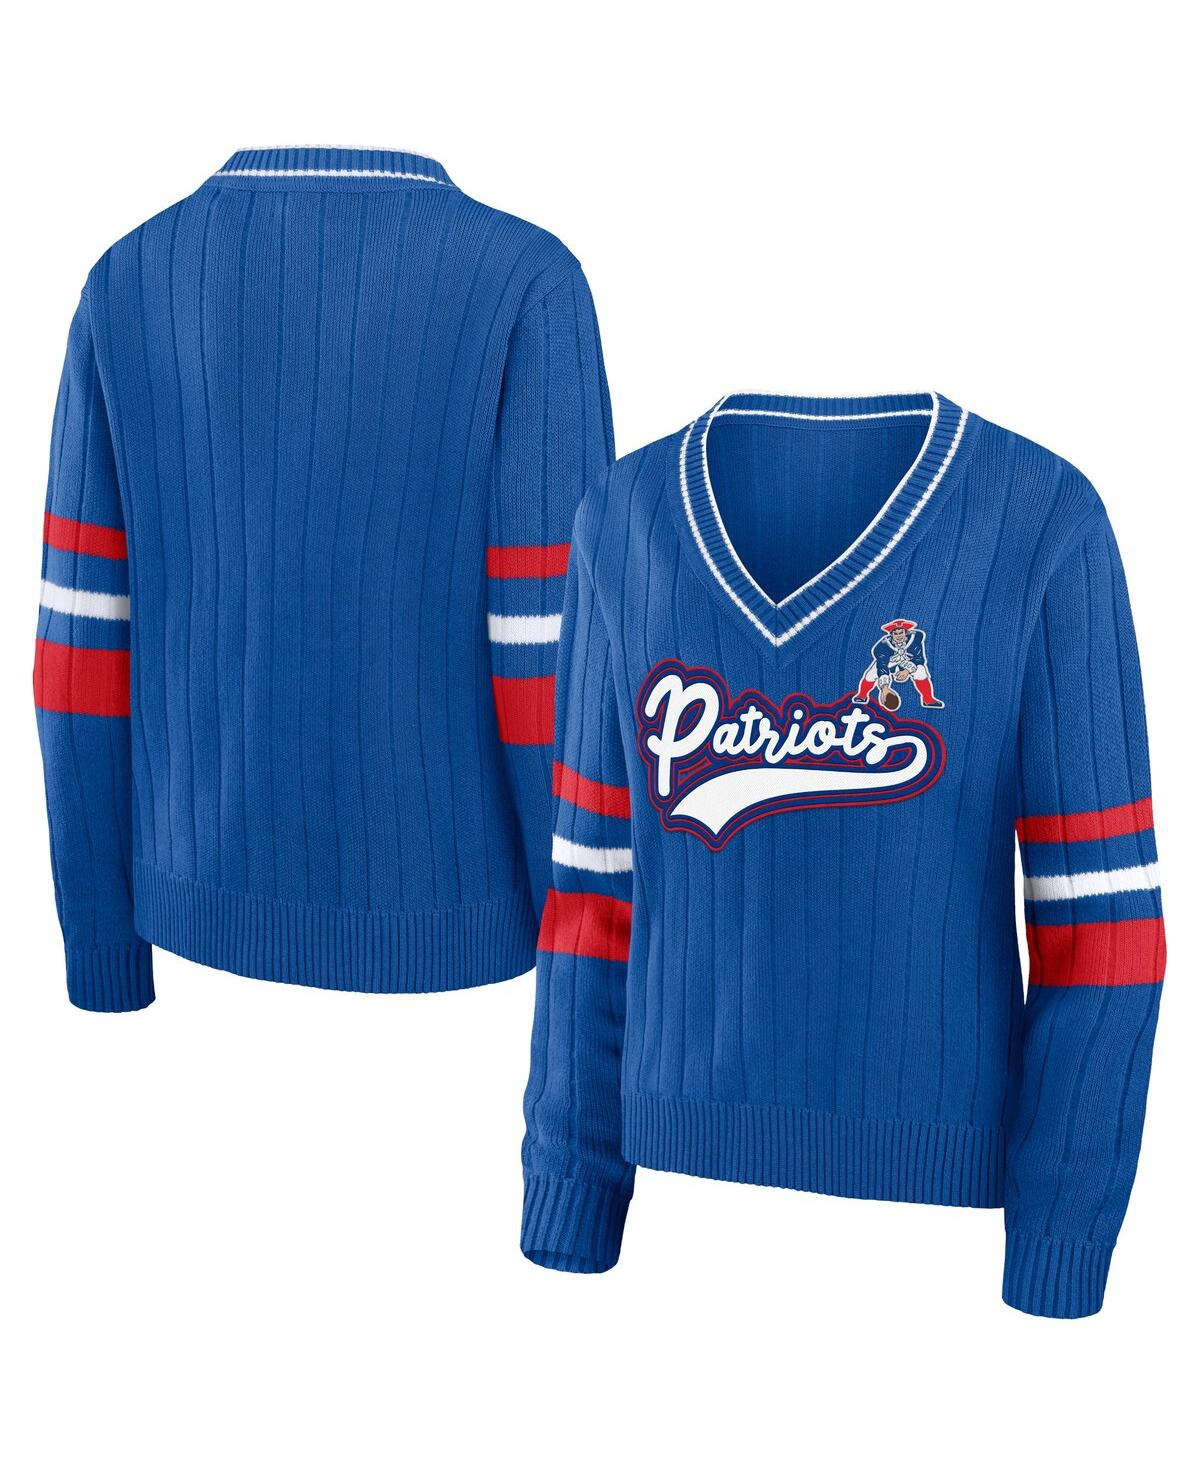 Wear By Erin Andrews Women's  Royal Distressed New England Patriots Throwback V-neck Sweater